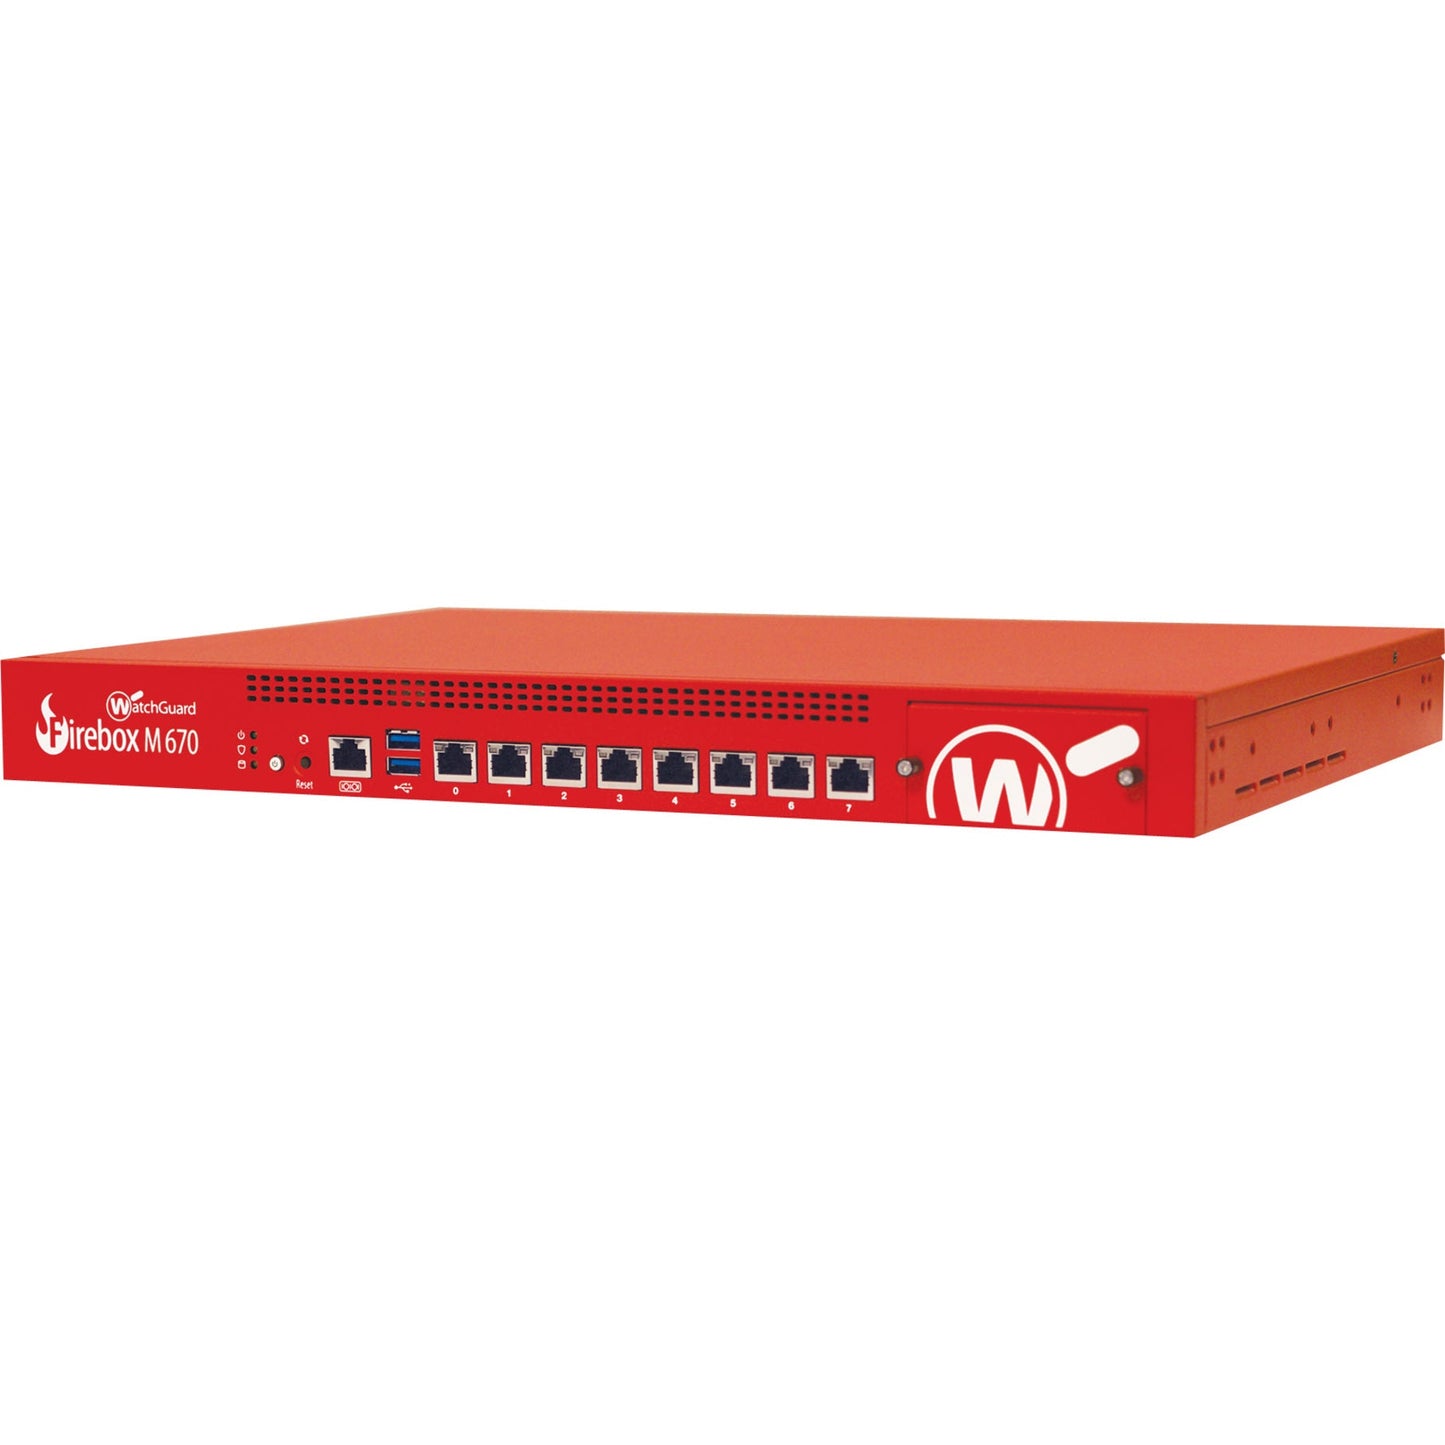 Trade up to WatchGuard Firebox M670 with 1-yr Basic Security Suite